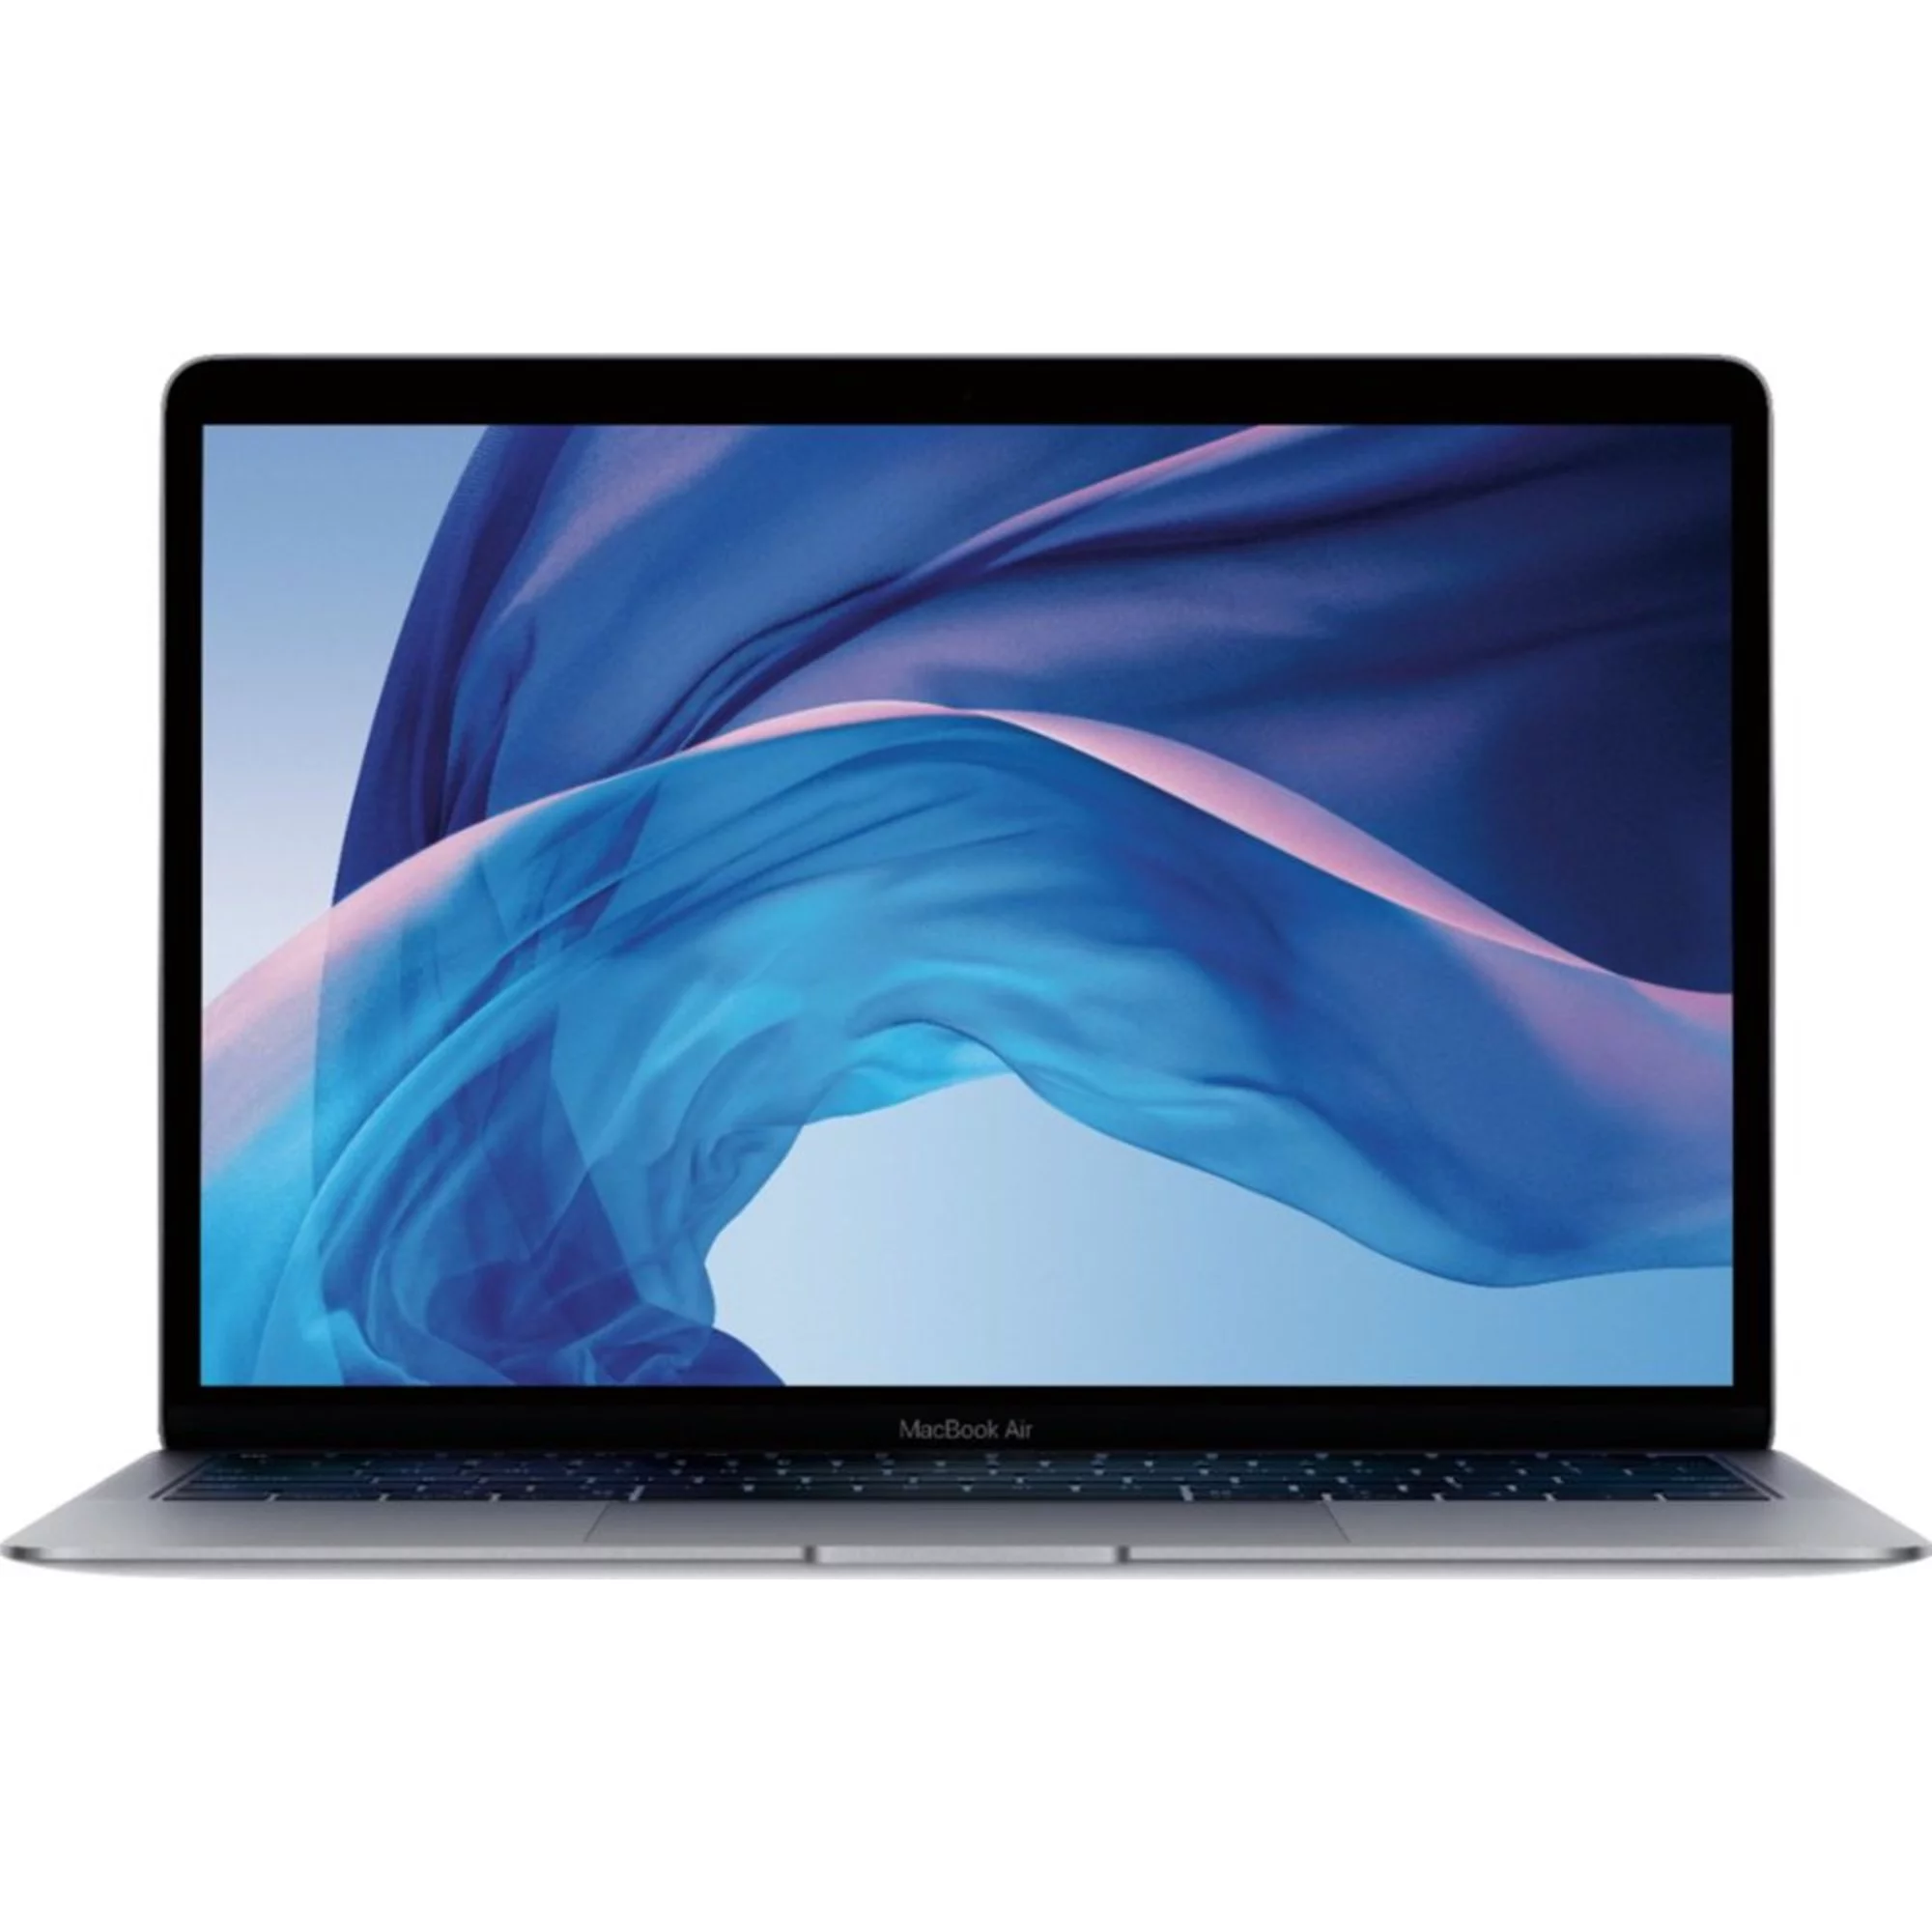 2018 MacBook Air 13 (8gb - 256gb - i5) – Strictly Apple Store